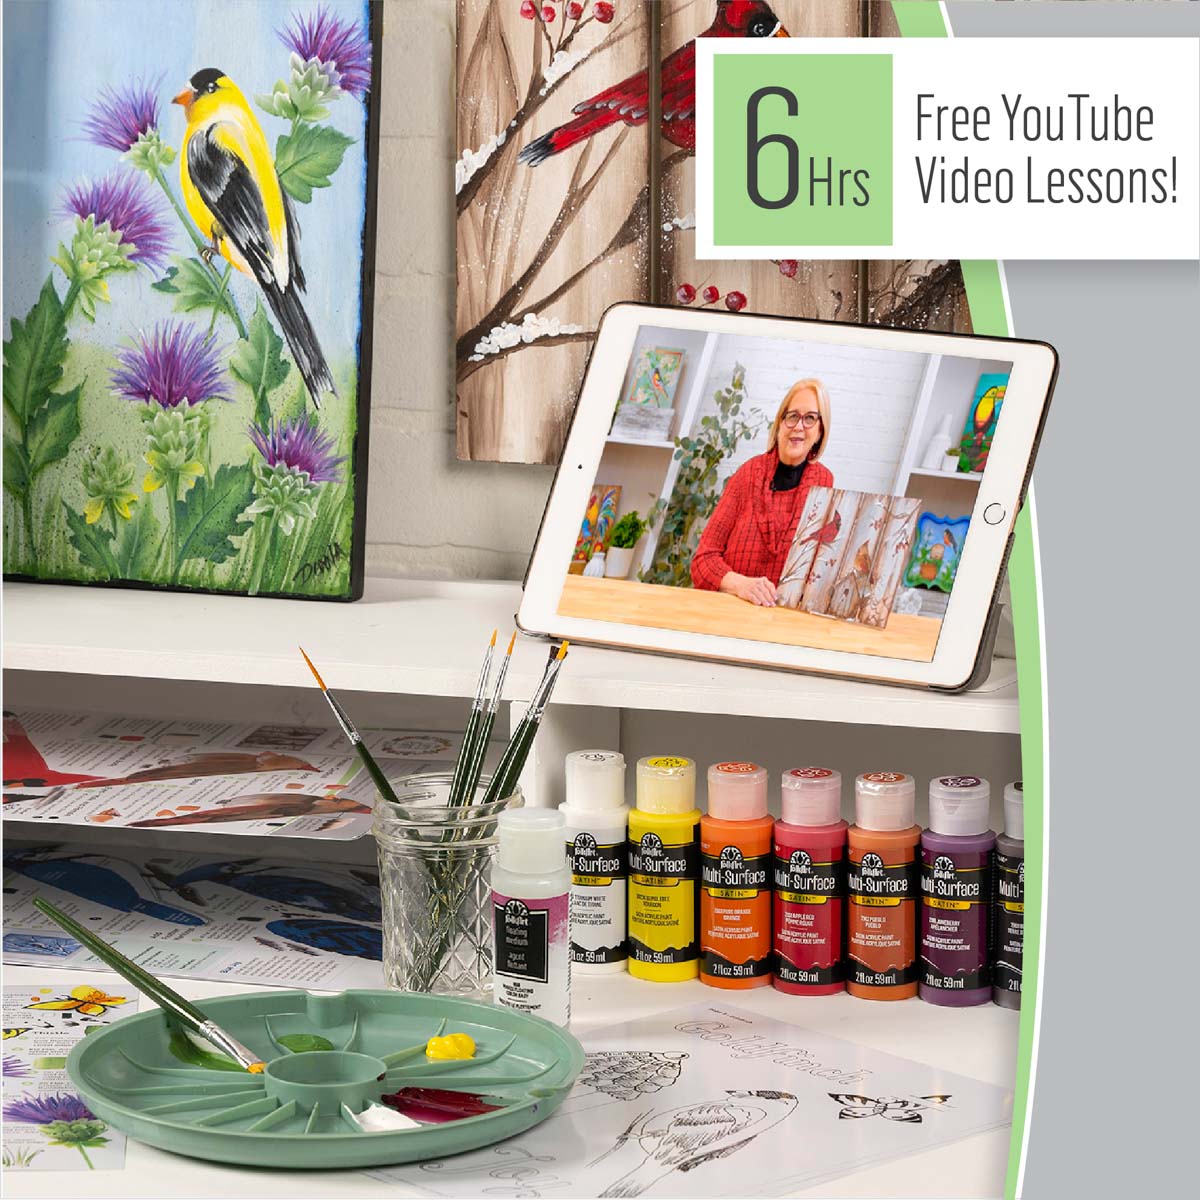 Let's Paint with FolkArt ® One Stroke™ Kit - Birds and Blossoms - 90284